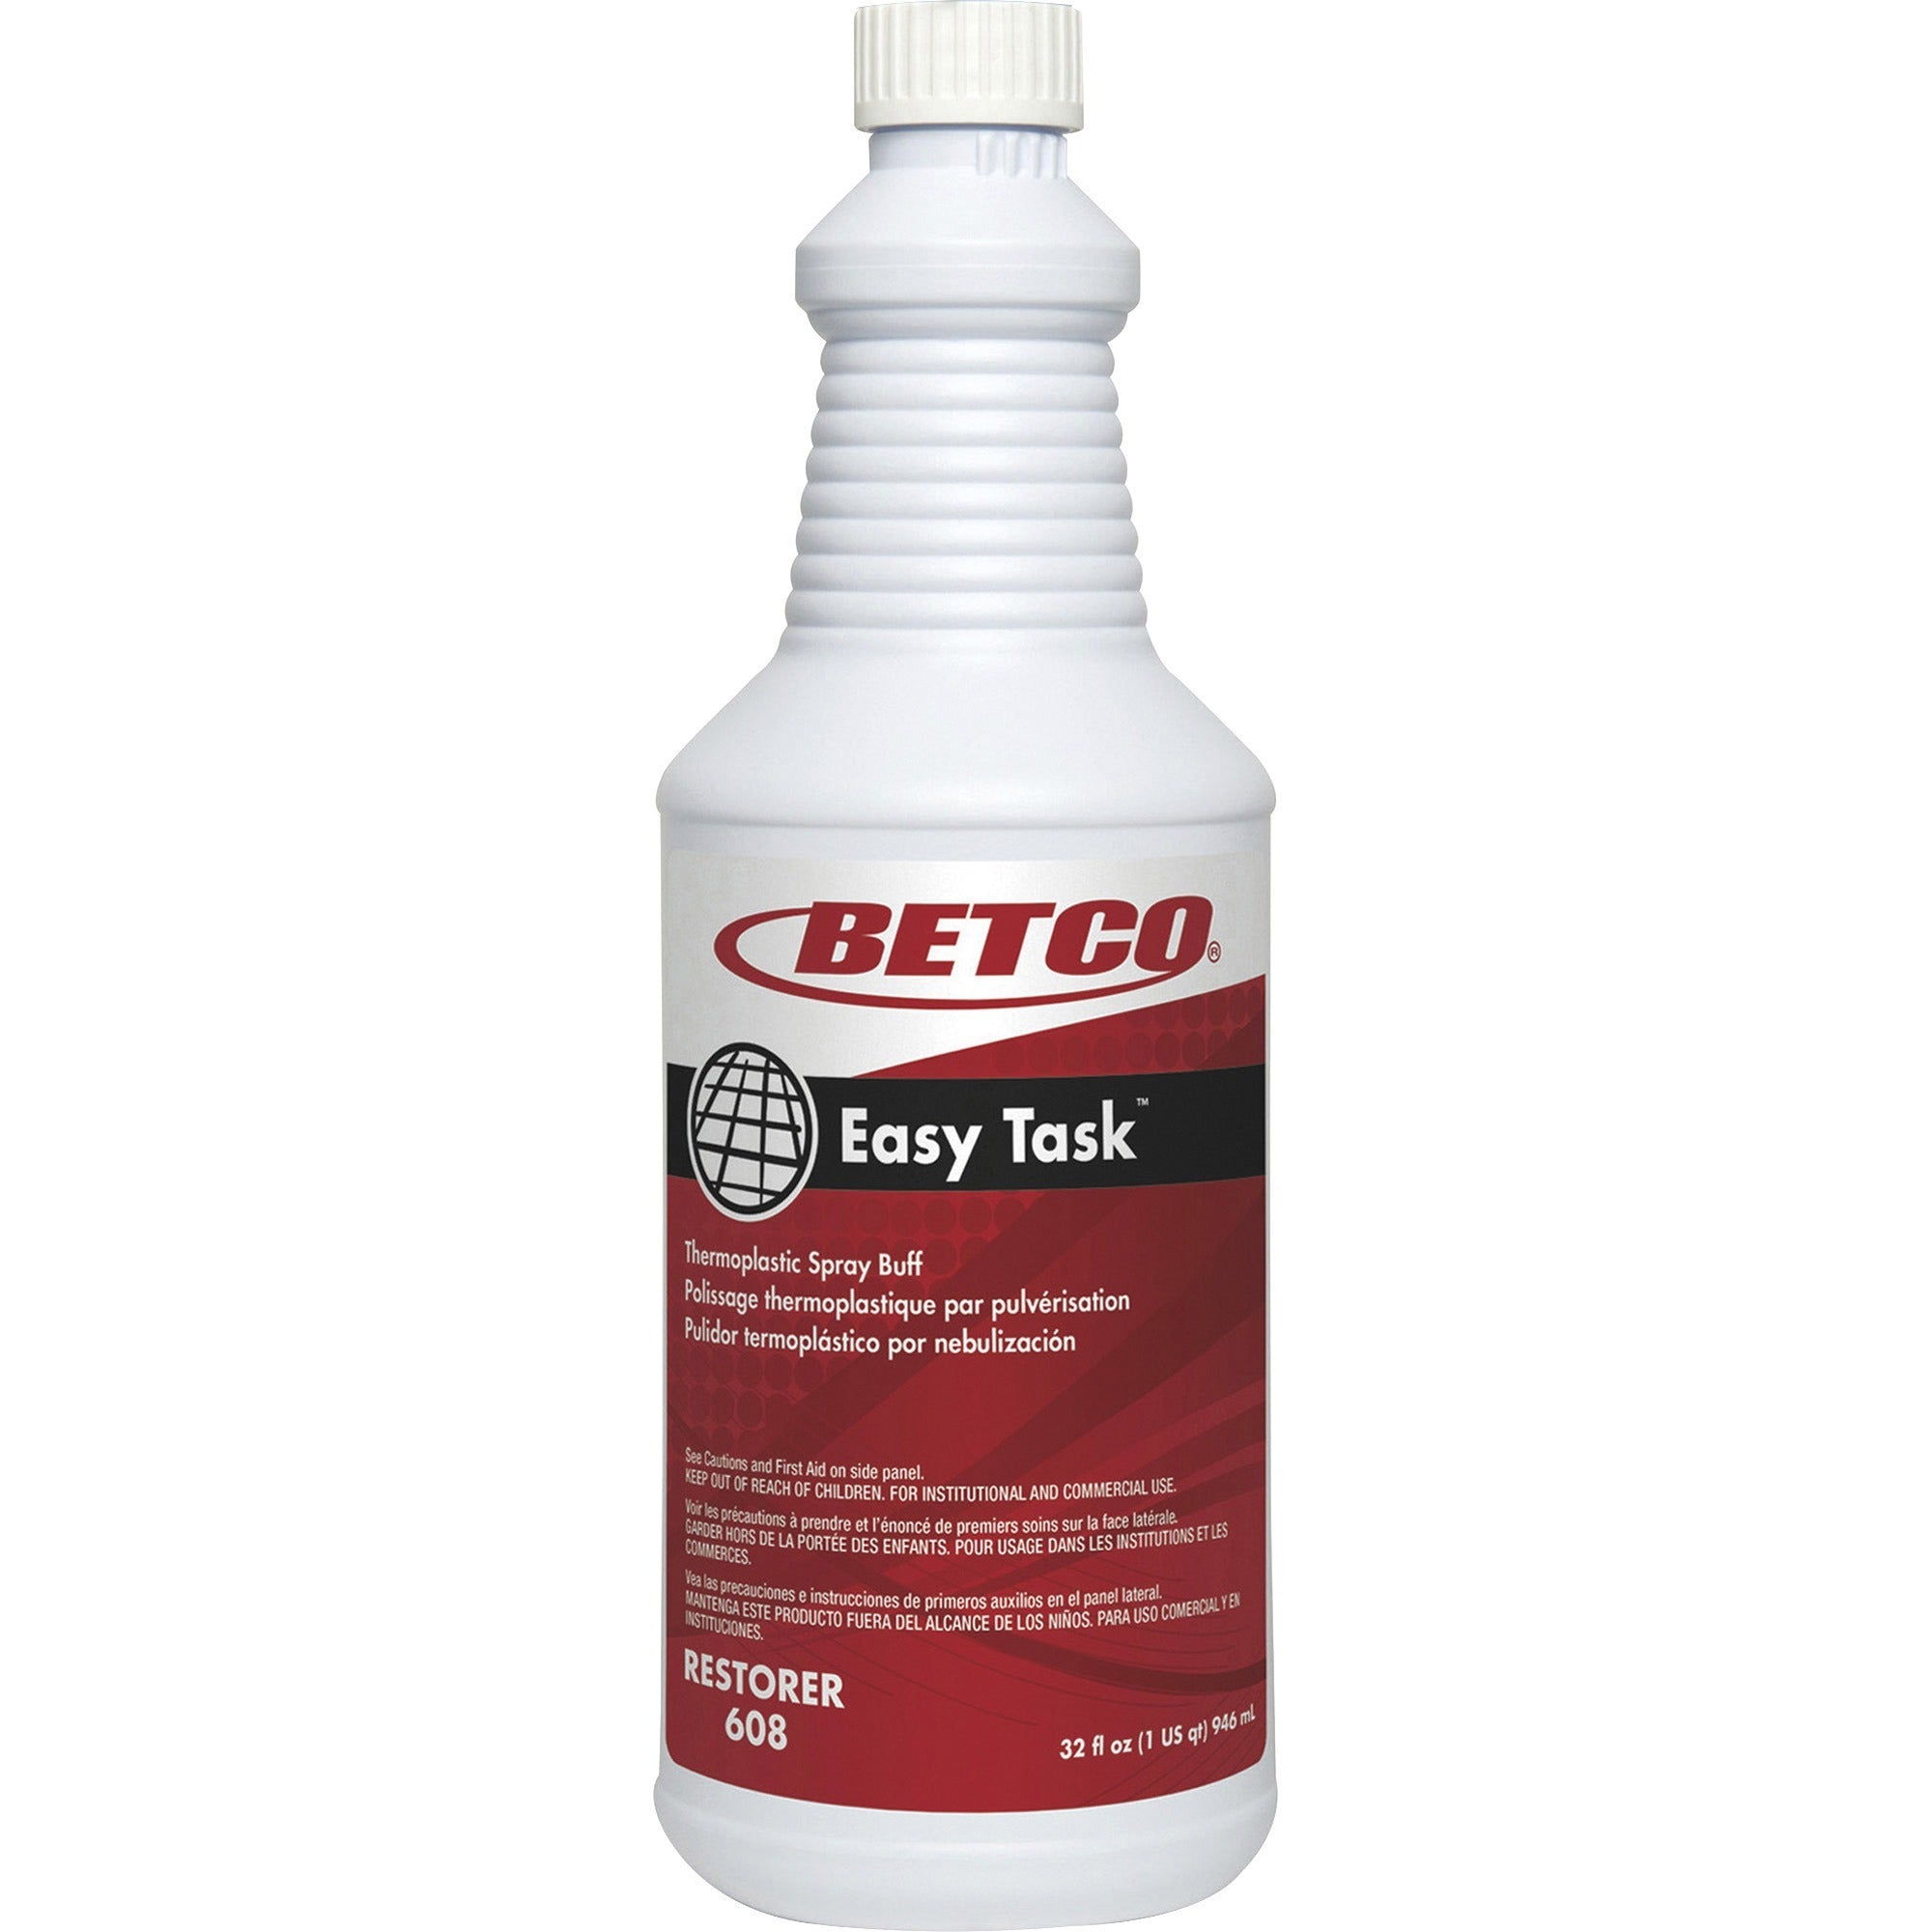 Betco Easy Task Thermoplastic Spray Buff - Ready-To-Use - 32 fl oz (1 quart) - Clean Bouquet Scent - 12 / Carton - Durable, Slip Resistant, Versatile - Green, Milky Green, Clear - 2